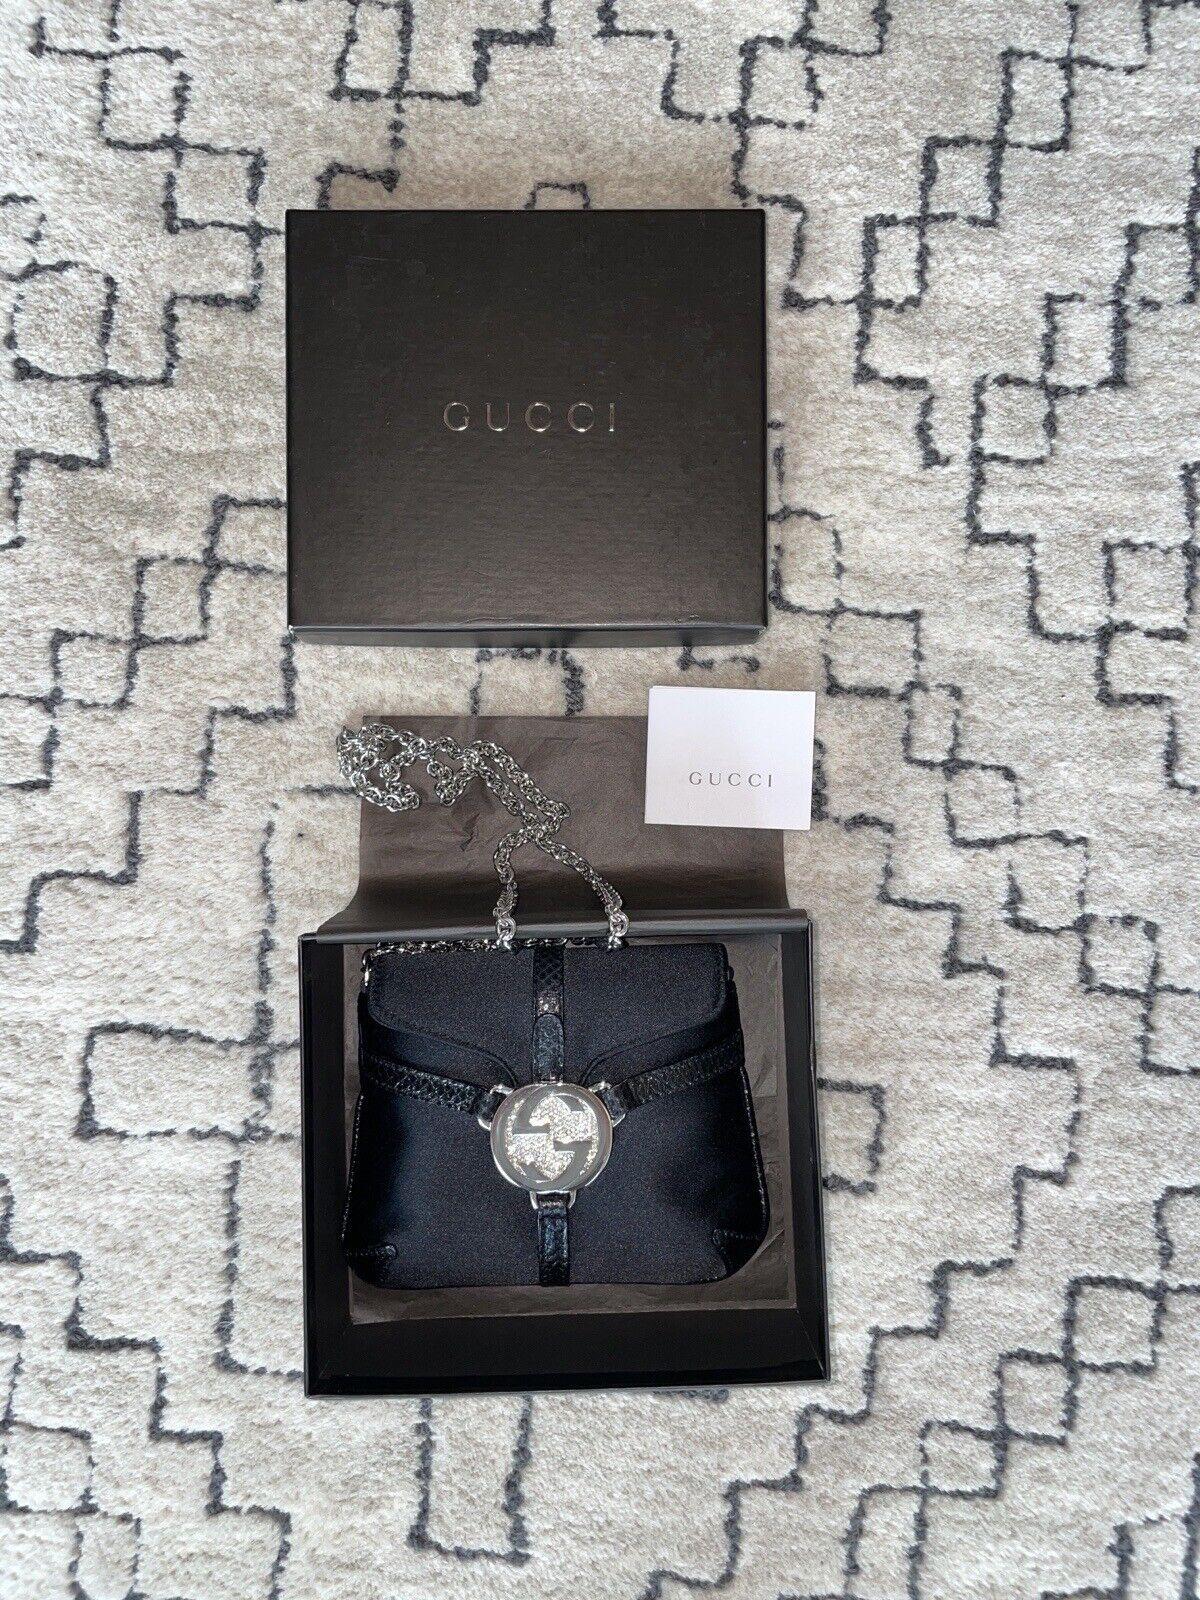 Gucci by Tom Ford
Vintage
Jet black with Swarovski crystals and Silver hardware
Pristine
Comes with everything pictured
Strap drop 20”
Bag is 5” x 6”

FINAL SALE. NO EXCEPTIONS.